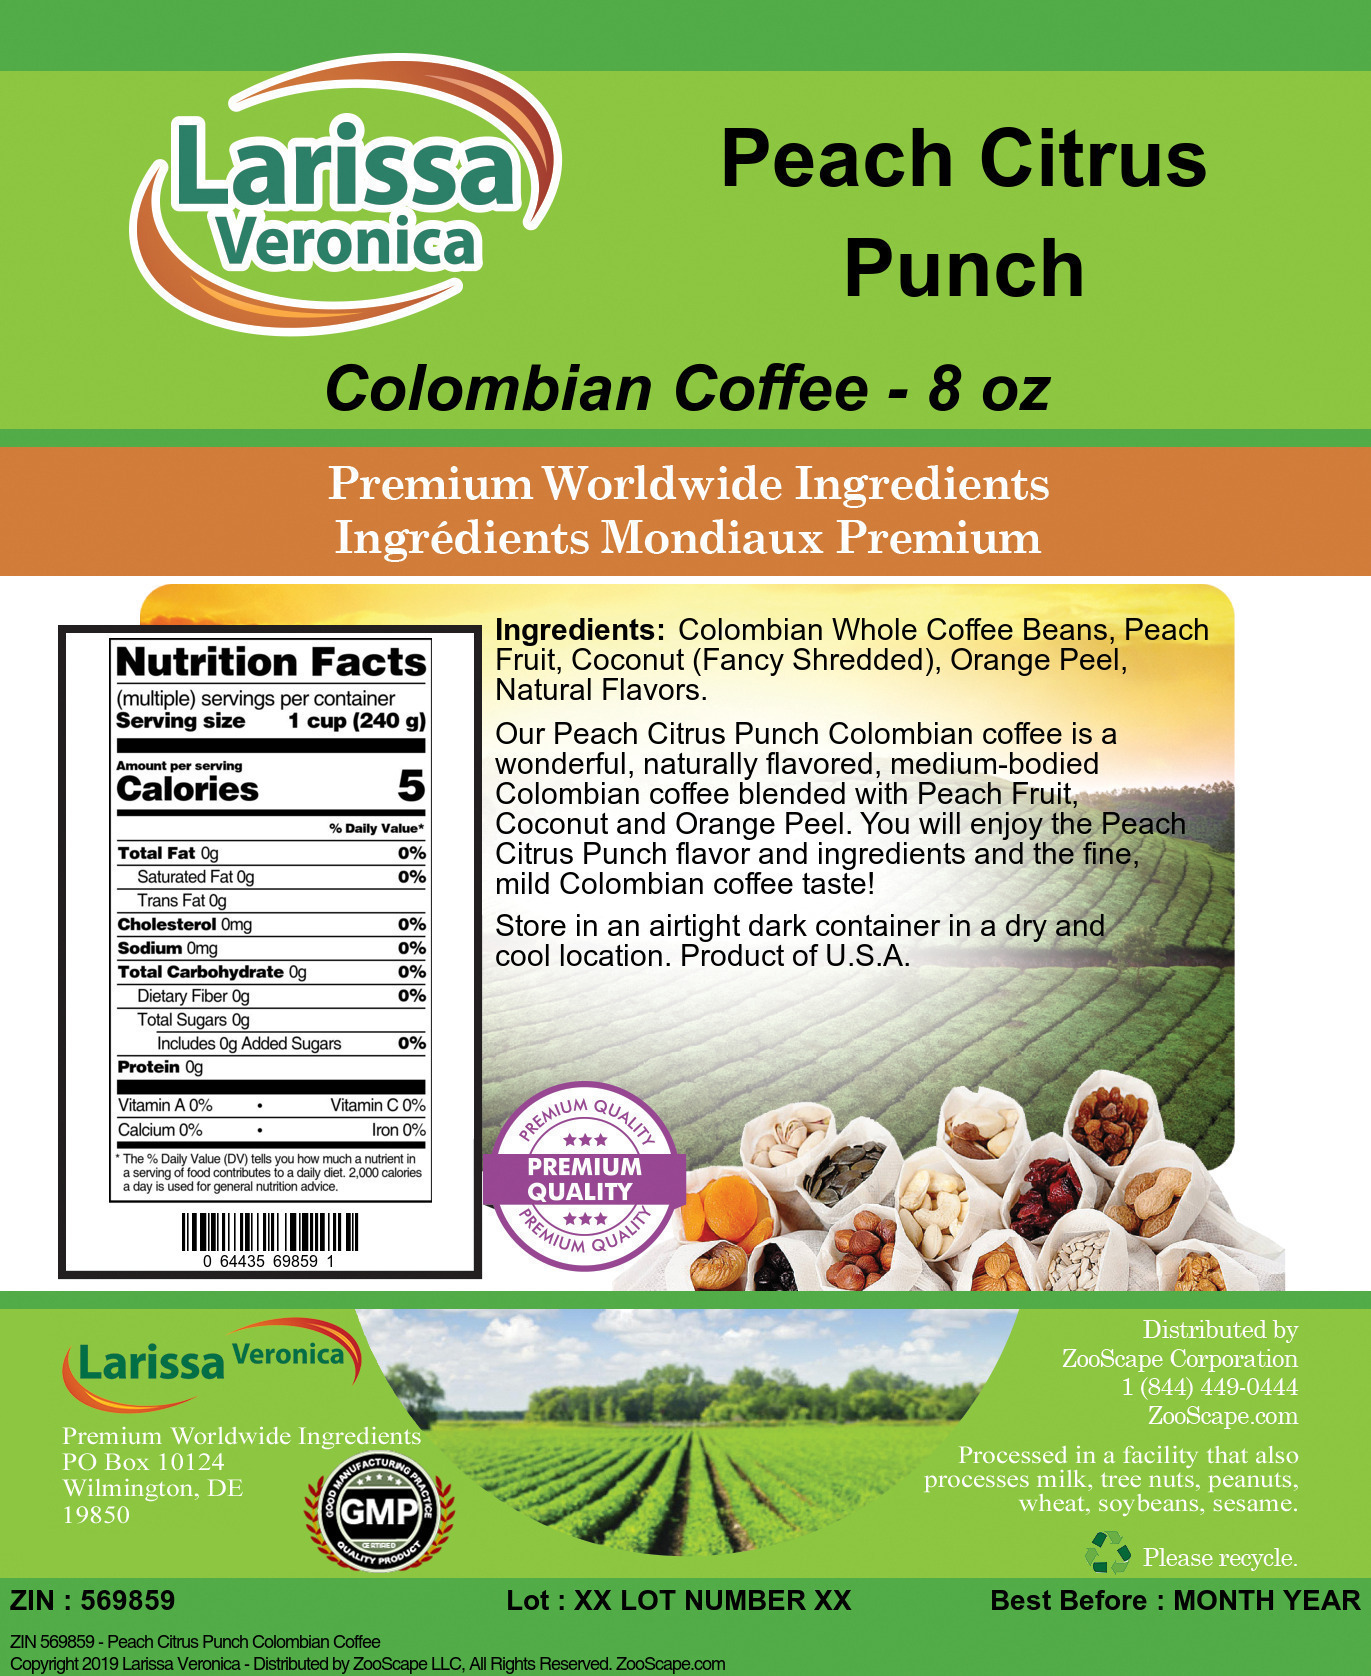 Peach Citrus Punch Colombian Coffee - Label